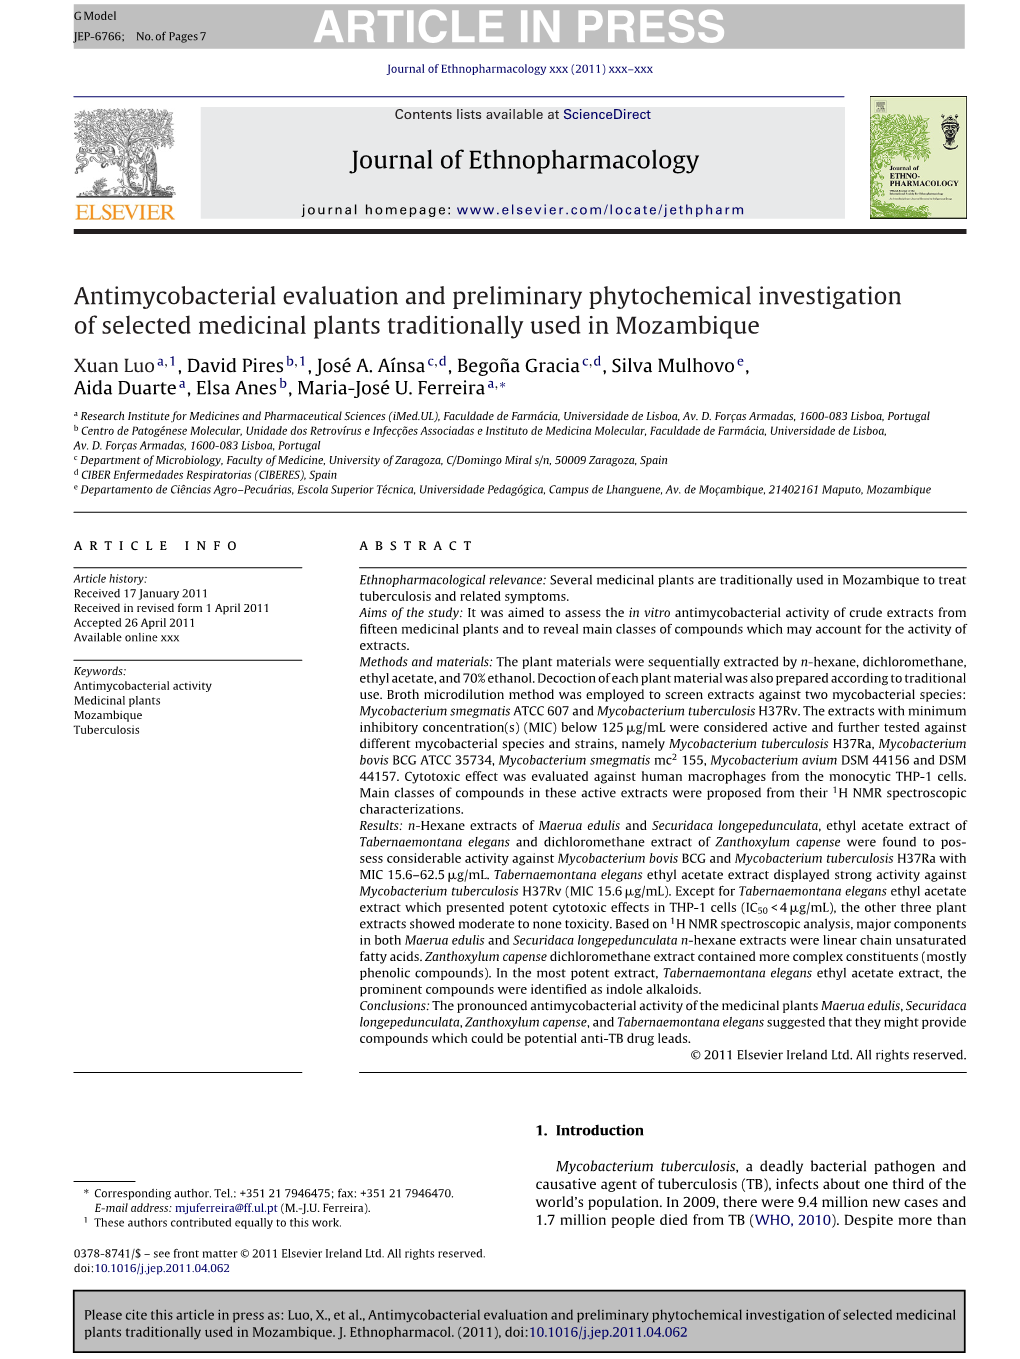 Antimycobacterial Evaluation and Preliminary Phytochemical Investigation of Selected Medicinal Plants Traditionally Used in Mozambique